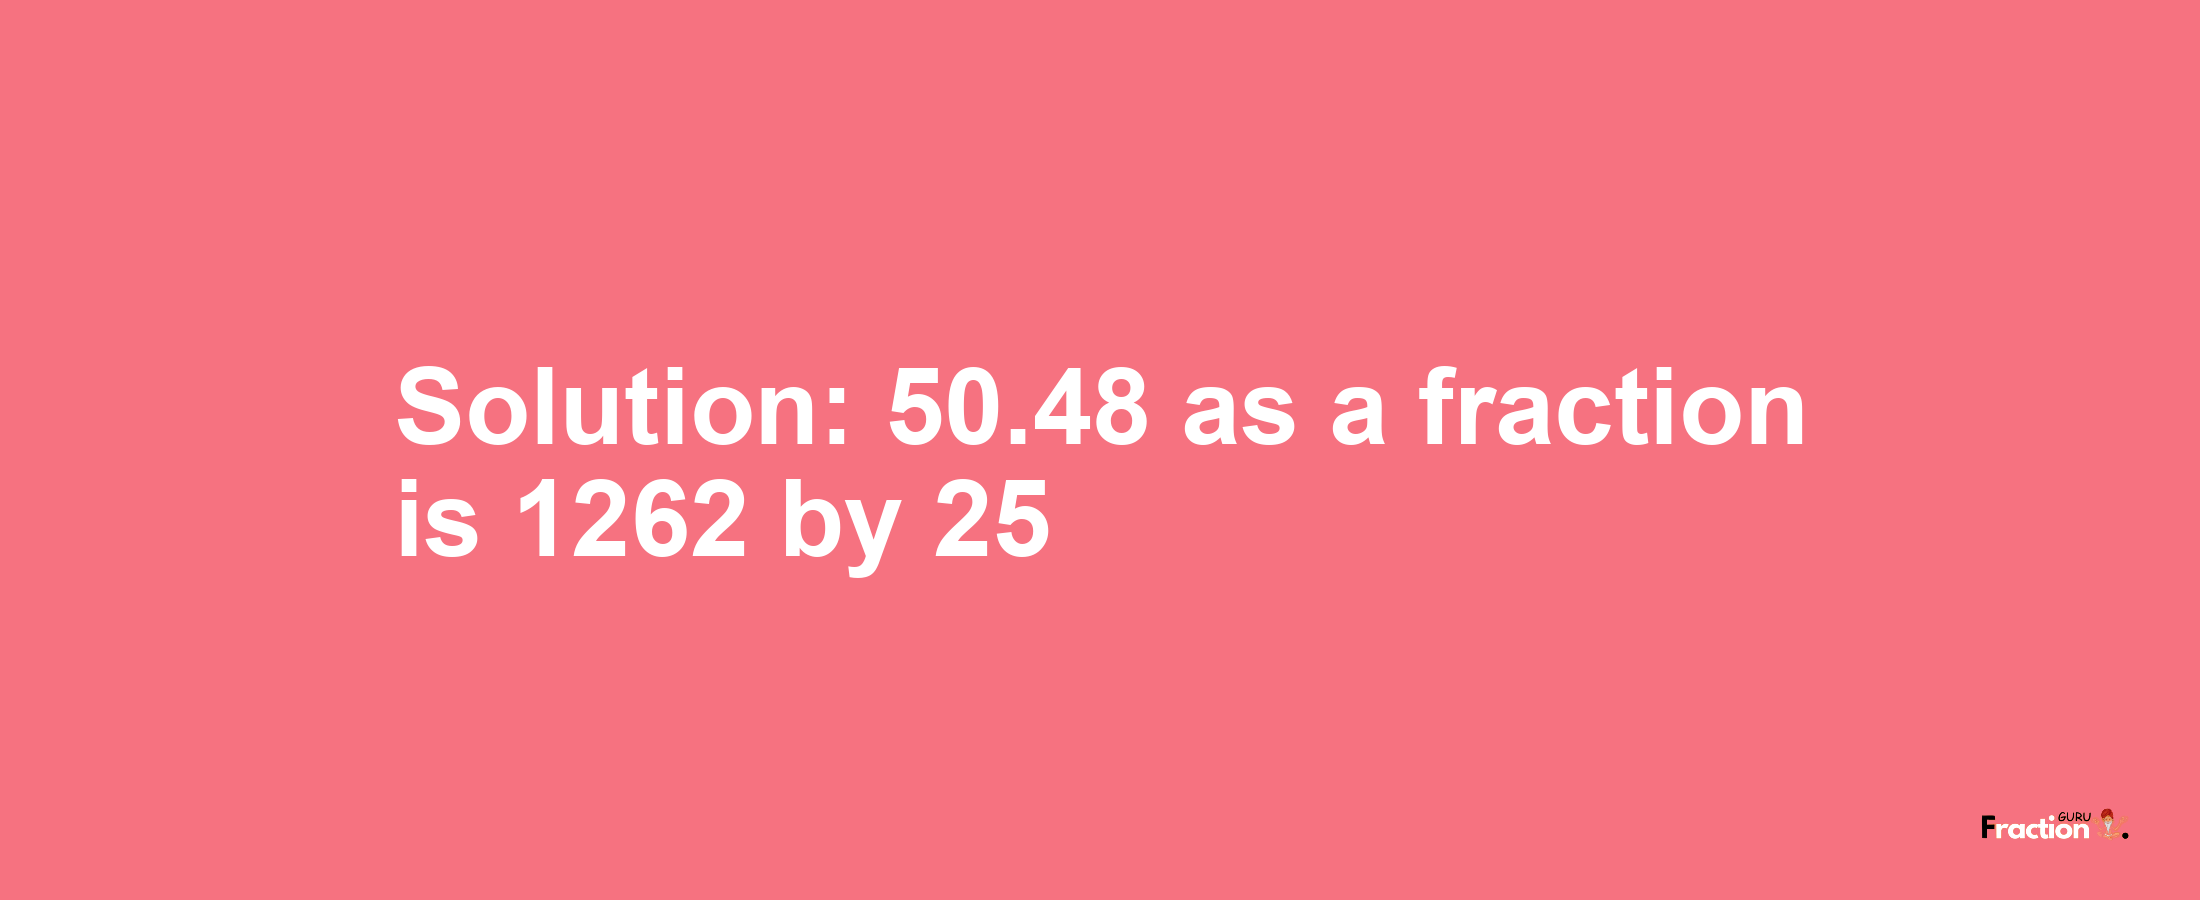 Solution:50.48 as a fraction is 1262/25